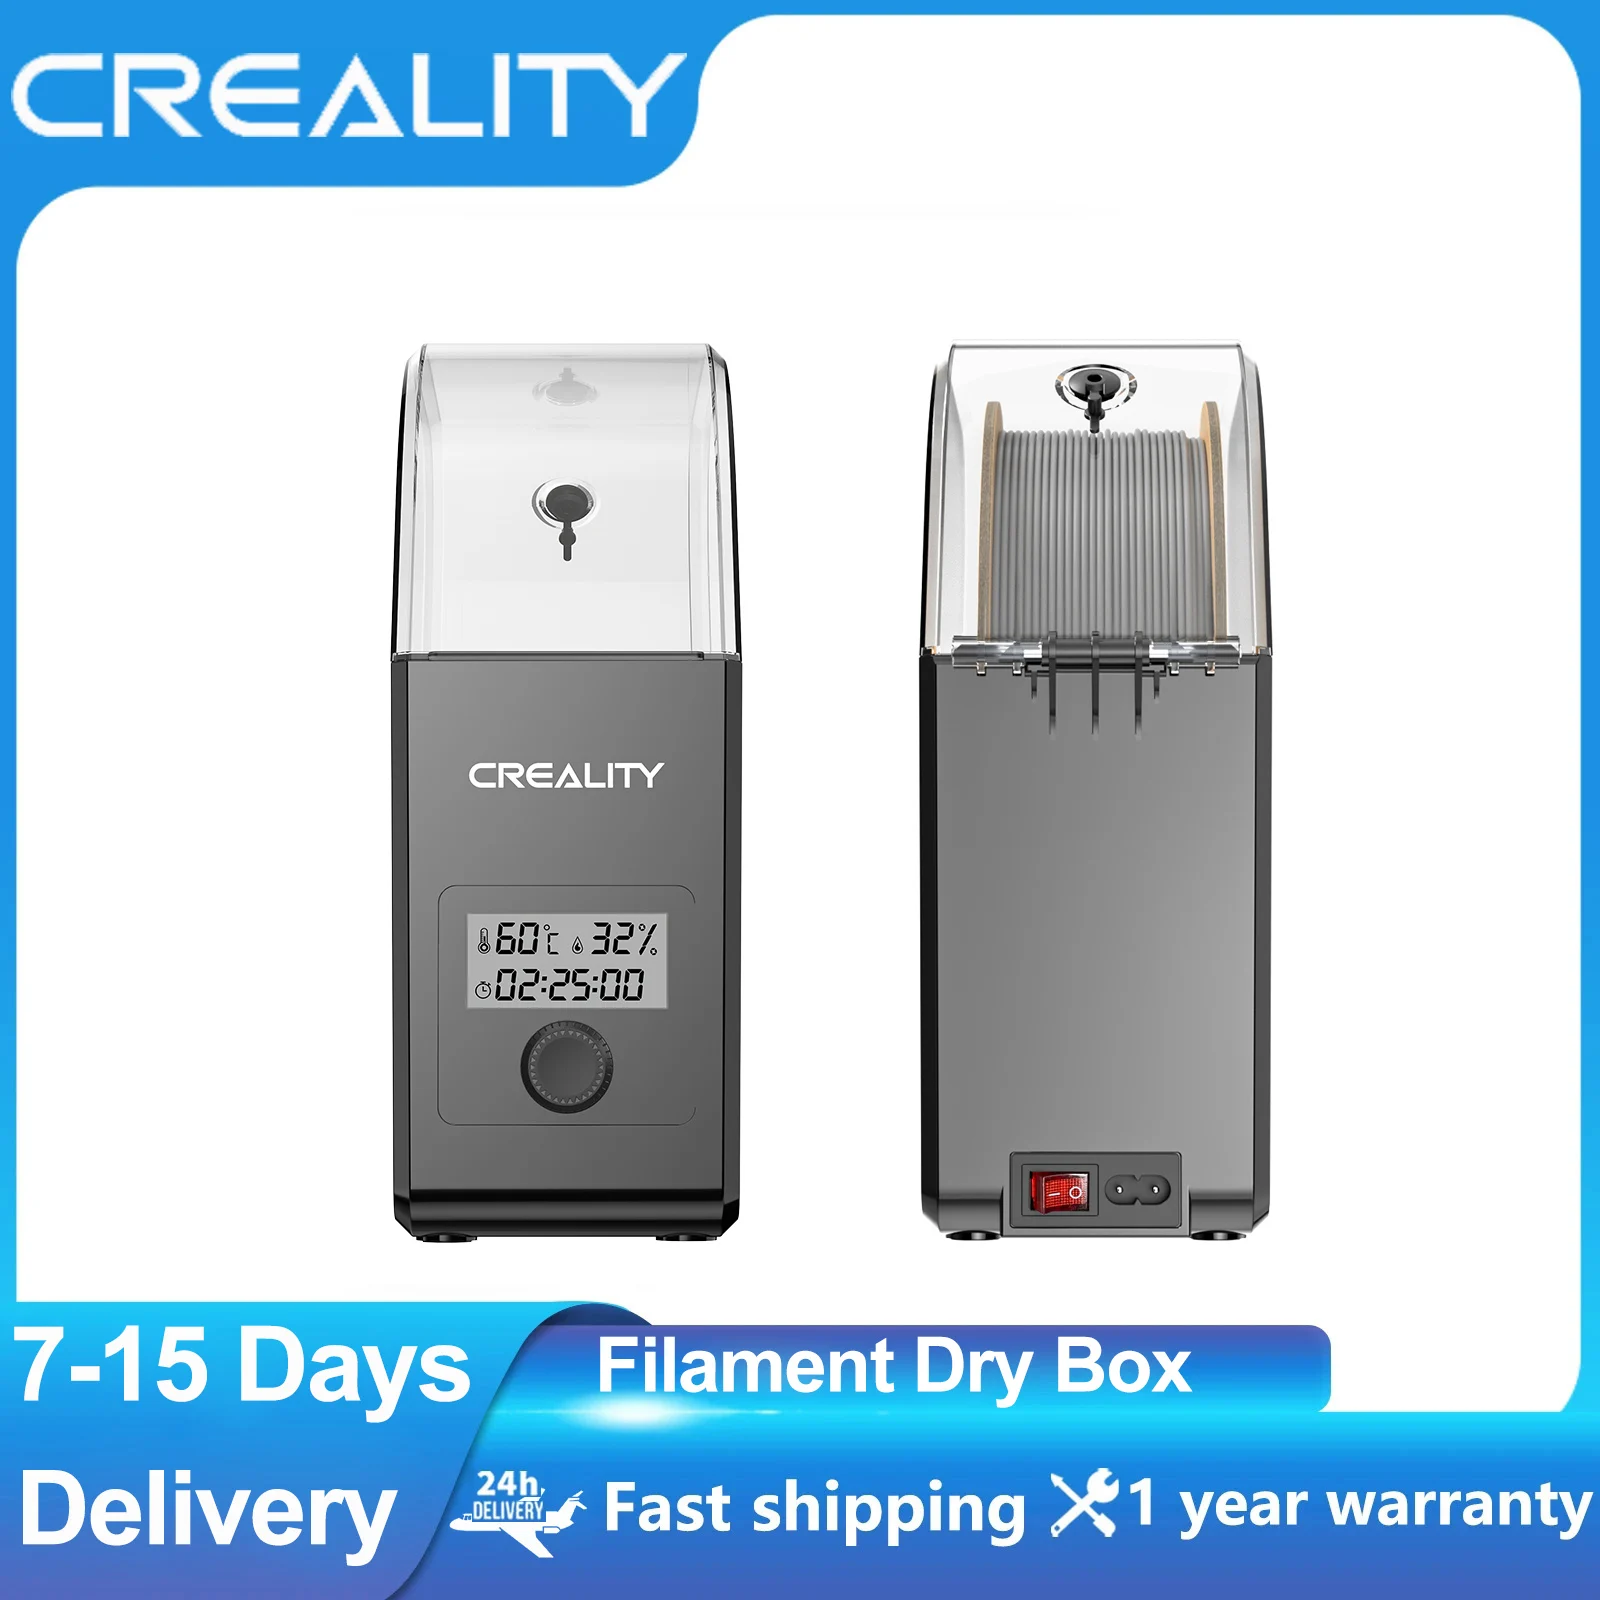 

Creality Filament Dry Box 2.0 For 3D Printer Adjustable Temperature 45℃-65℃ Real-time Humidity Monitoring Hot-Air Heating 0-24h